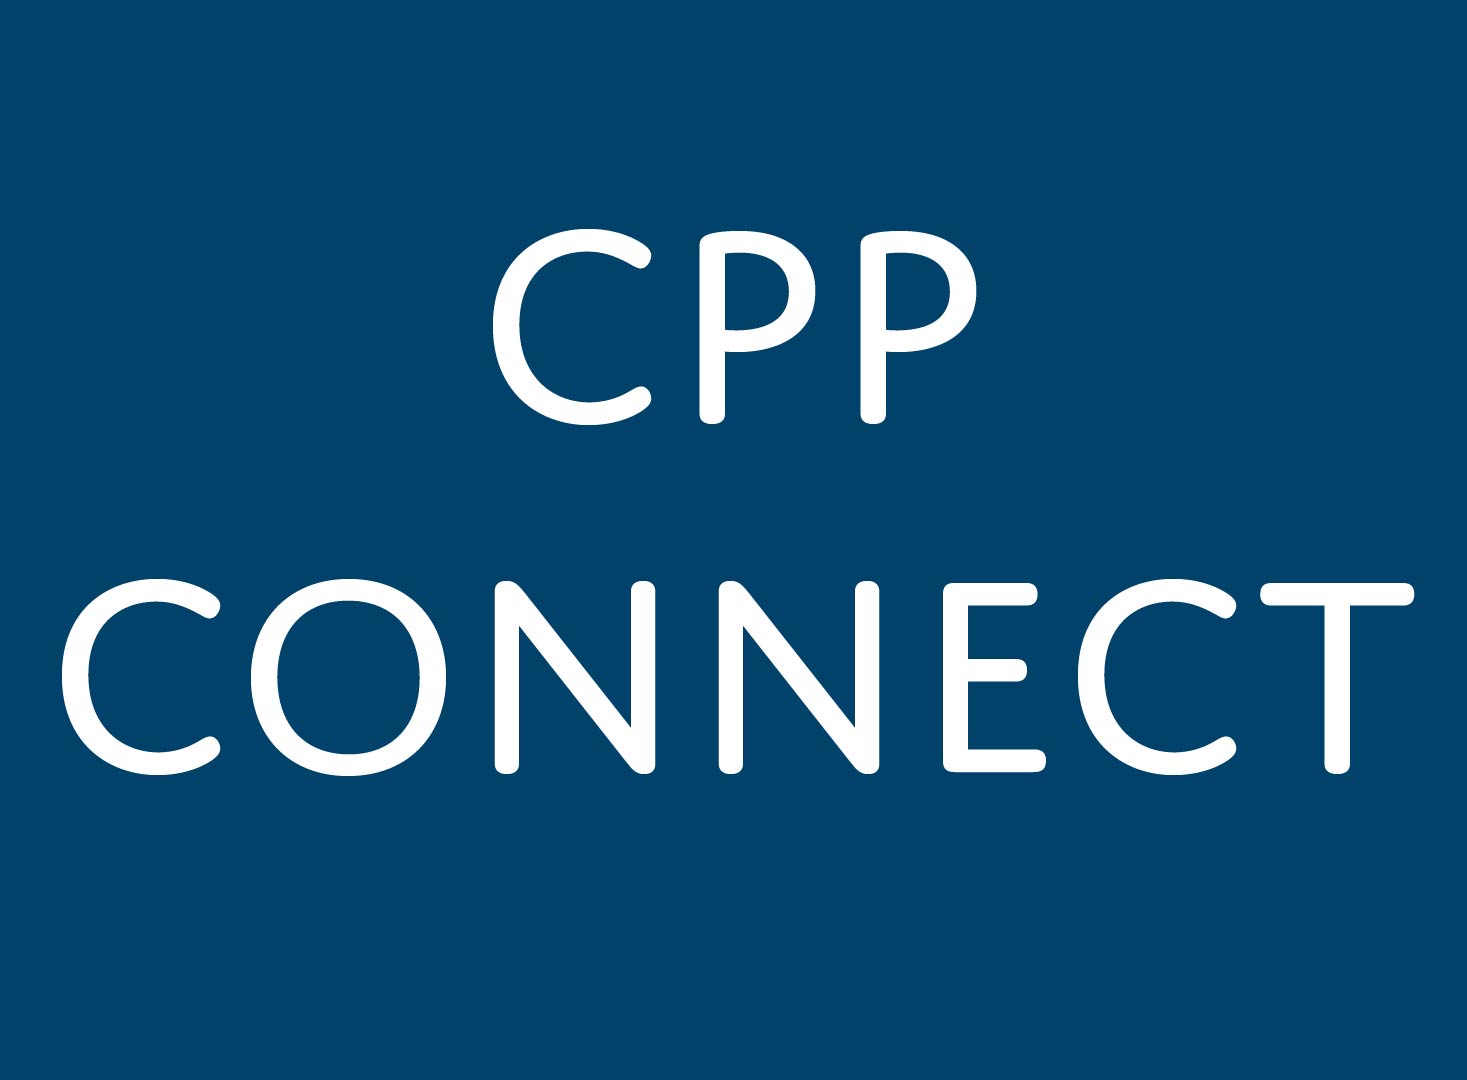 CPP Connect